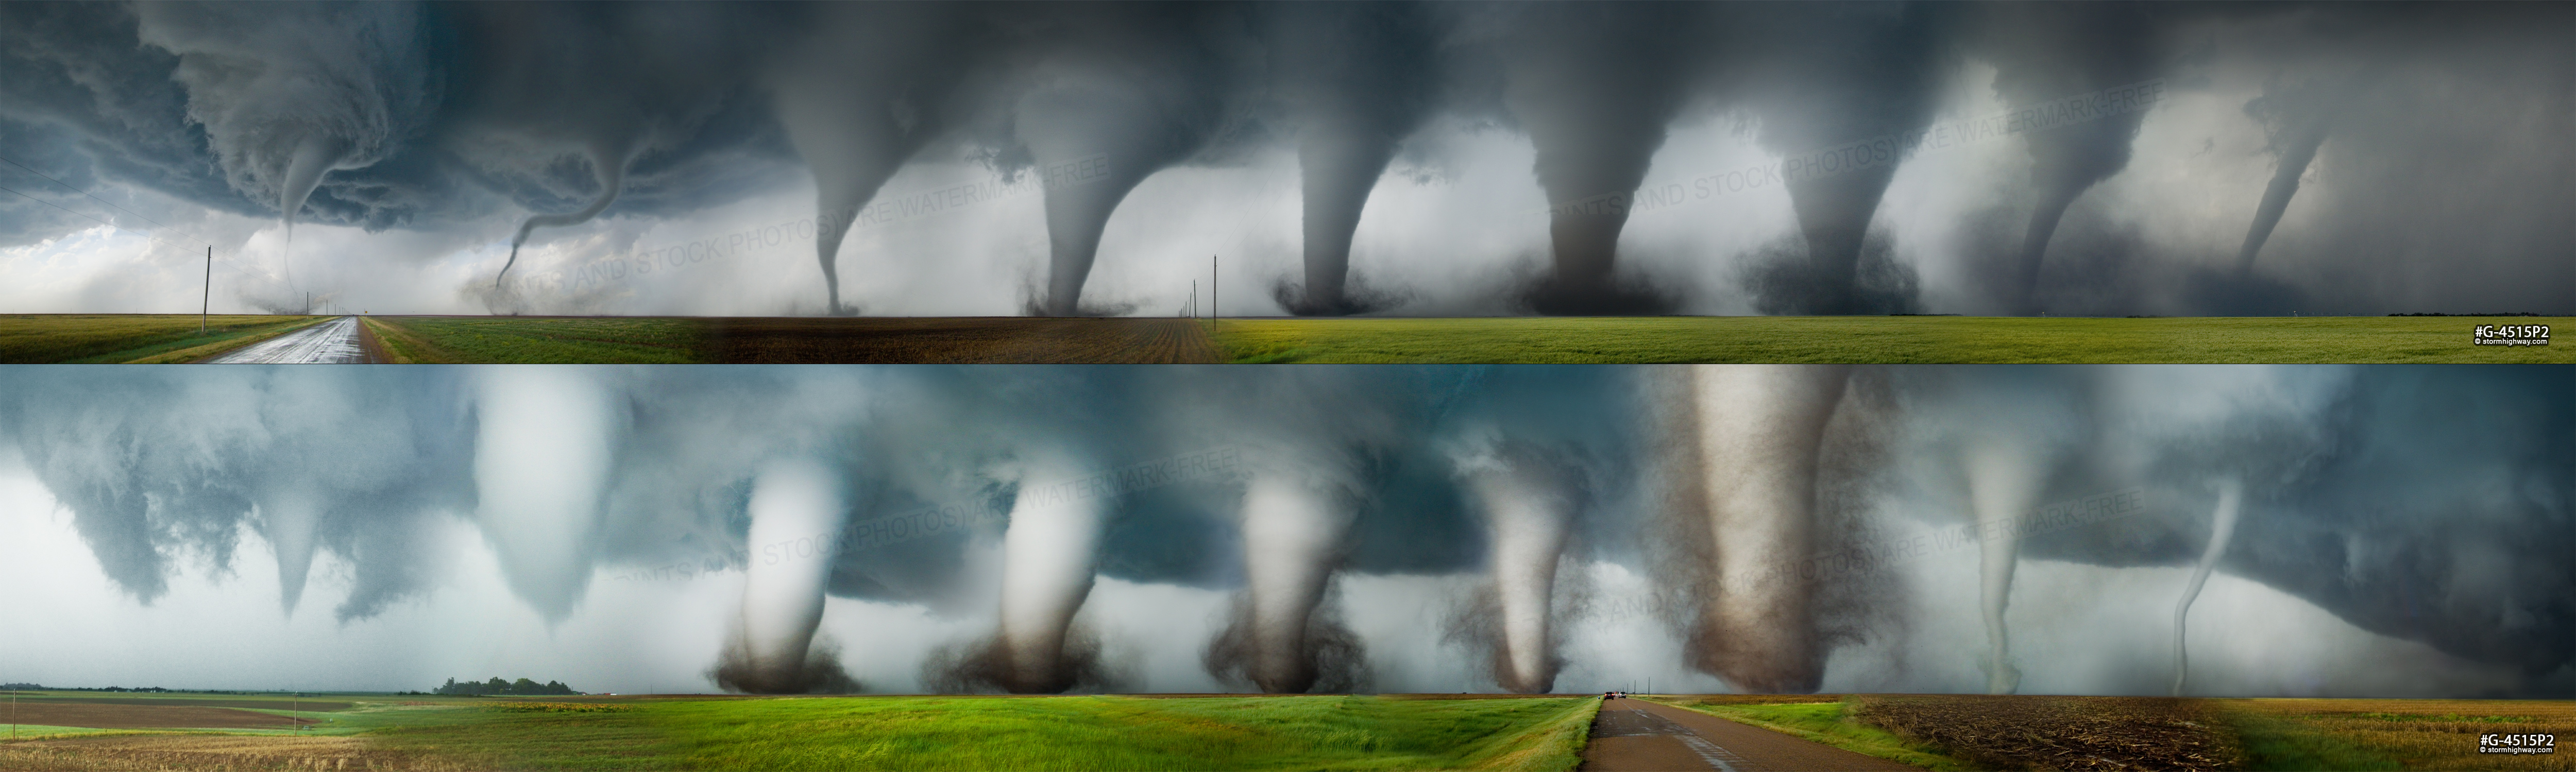 Life cycle of strong tornadoes near Dodge City, Kansas, composite panoramas